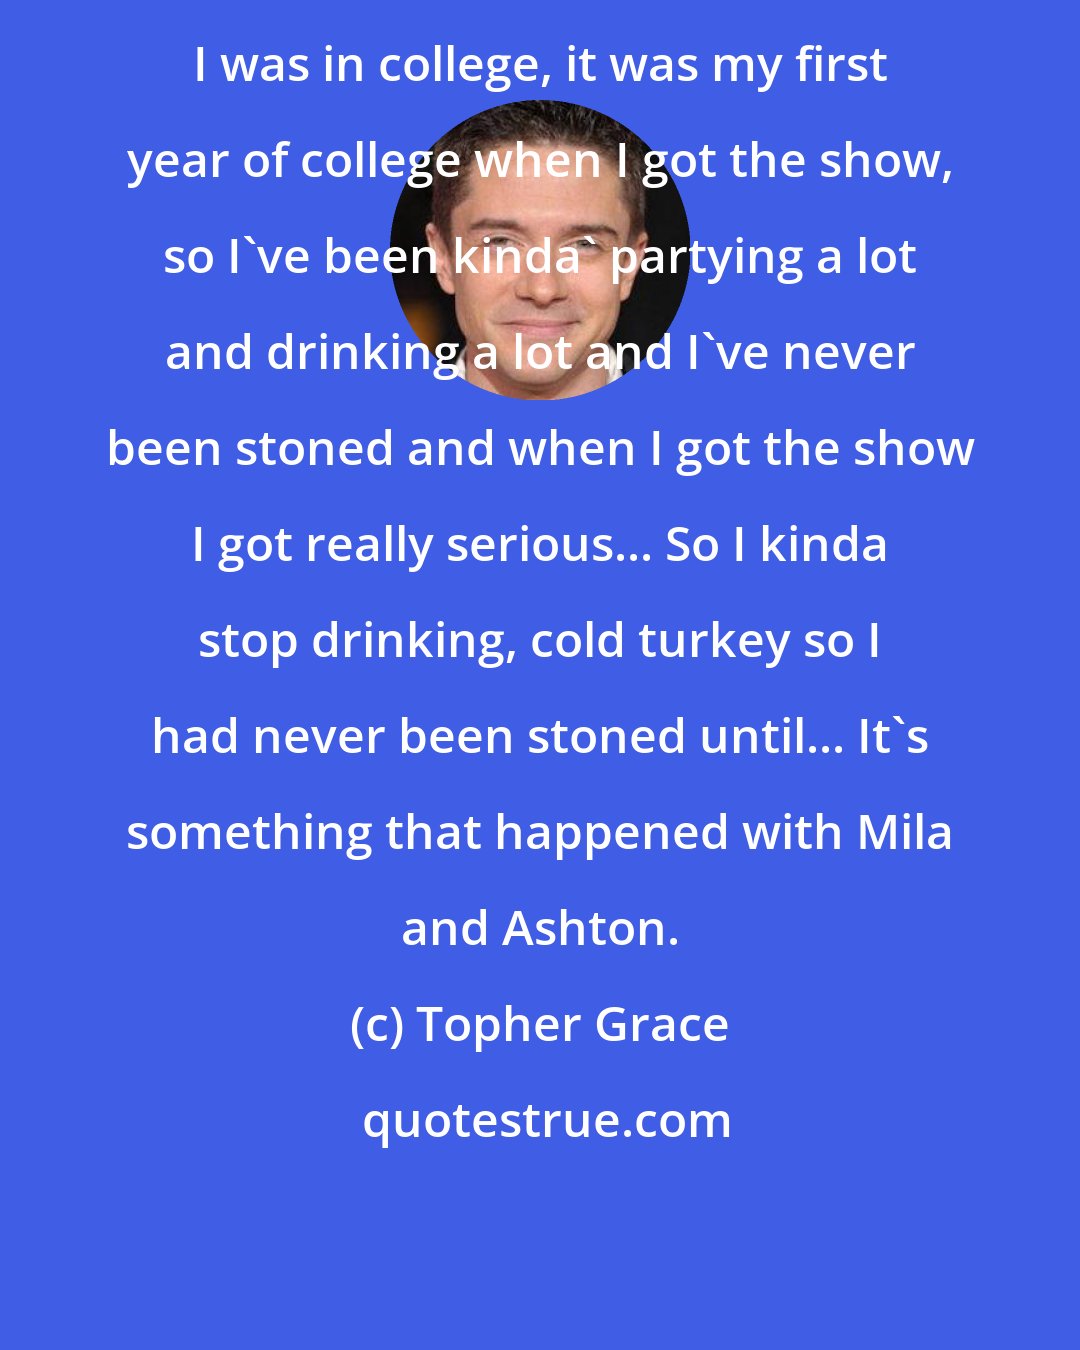 Topher Grace: I was in college, it was my first year of college when I got the show, so I've been kinda' partying a lot and drinking a lot and I've never been stoned and when I got the show I got really serious... So I kinda stop drinking, cold turkey so I had never been stoned until... It's something that happened with Mila and Ashton.